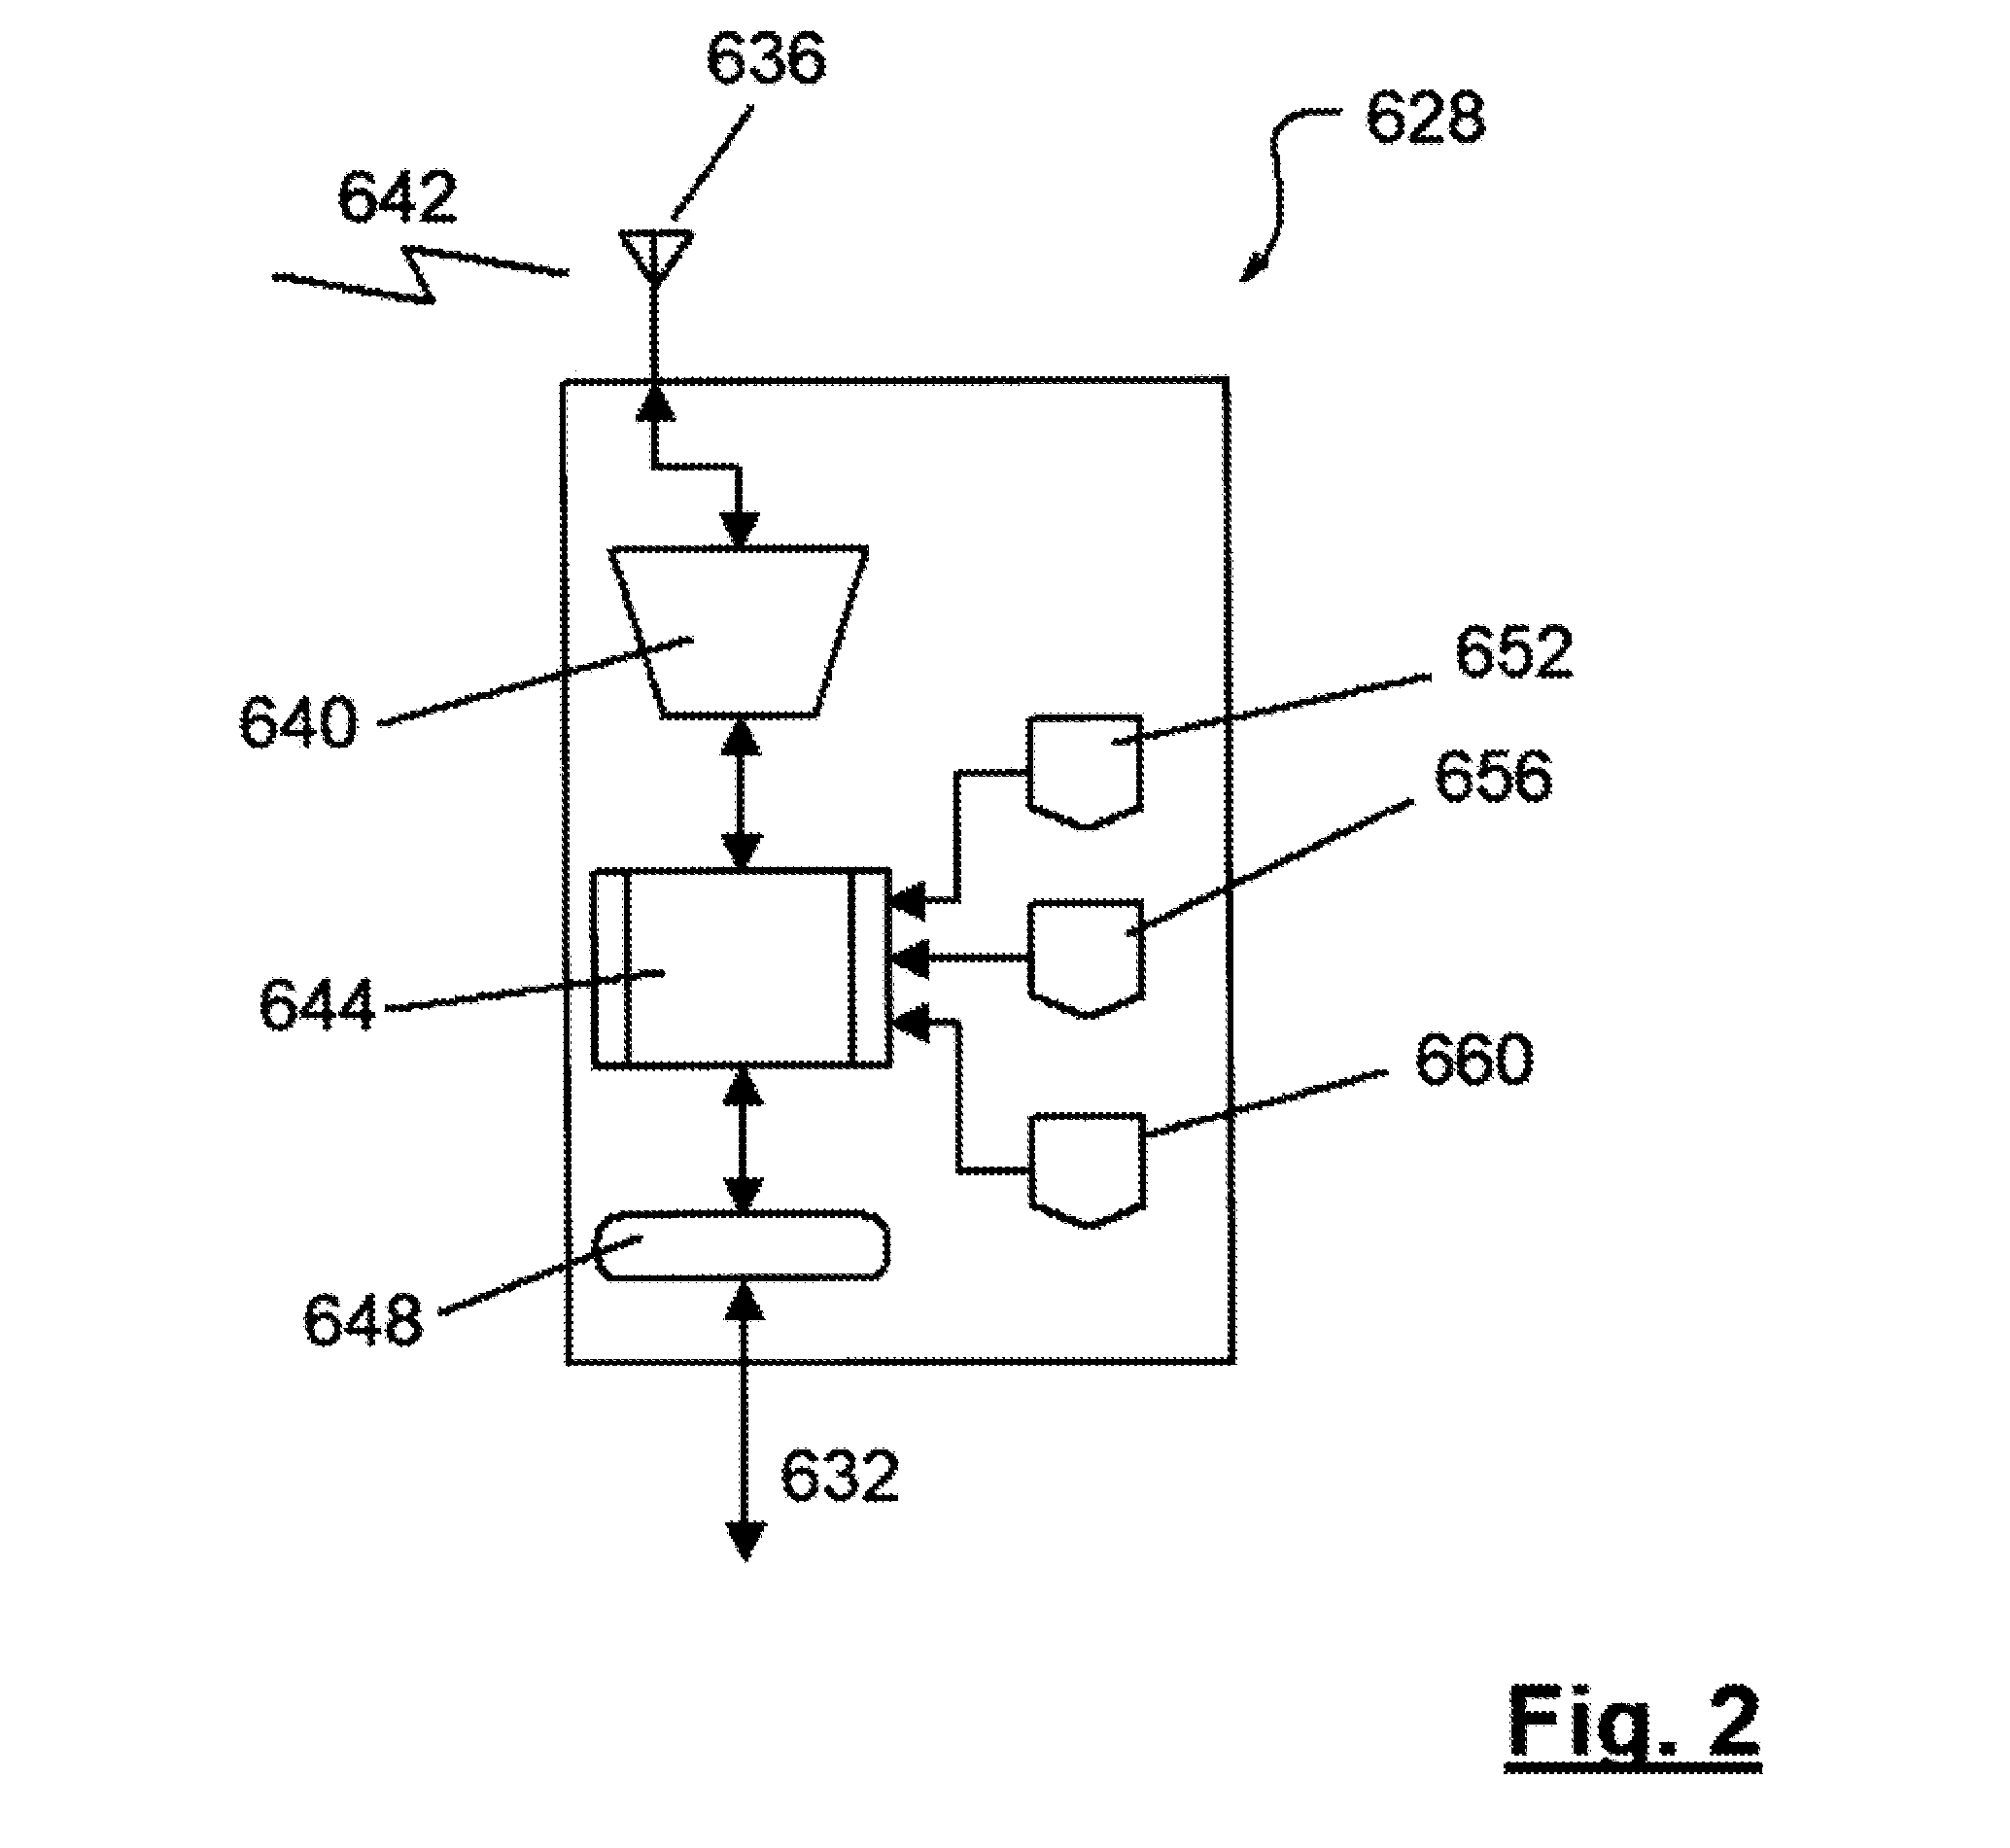 Mobile Control Node System and Method for Vehicles